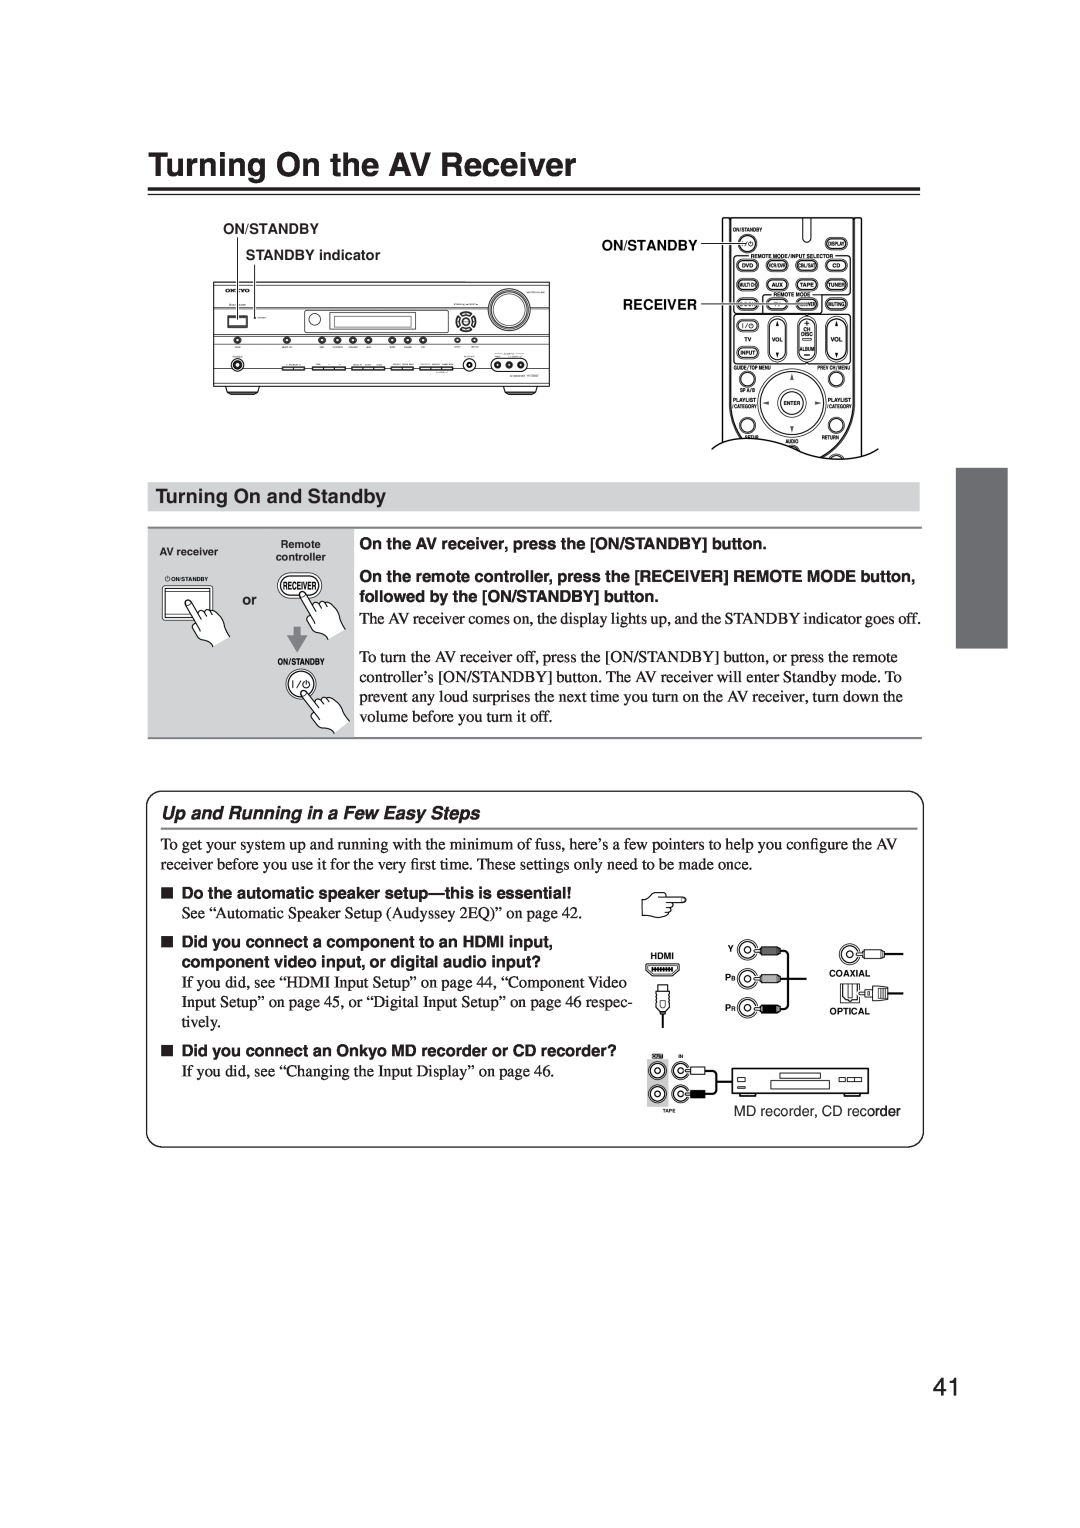 Onkyo S5100 instruction manual Turning On the AV Receiver, Turning On and Standby, Up and Running in a Few Easy Steps 